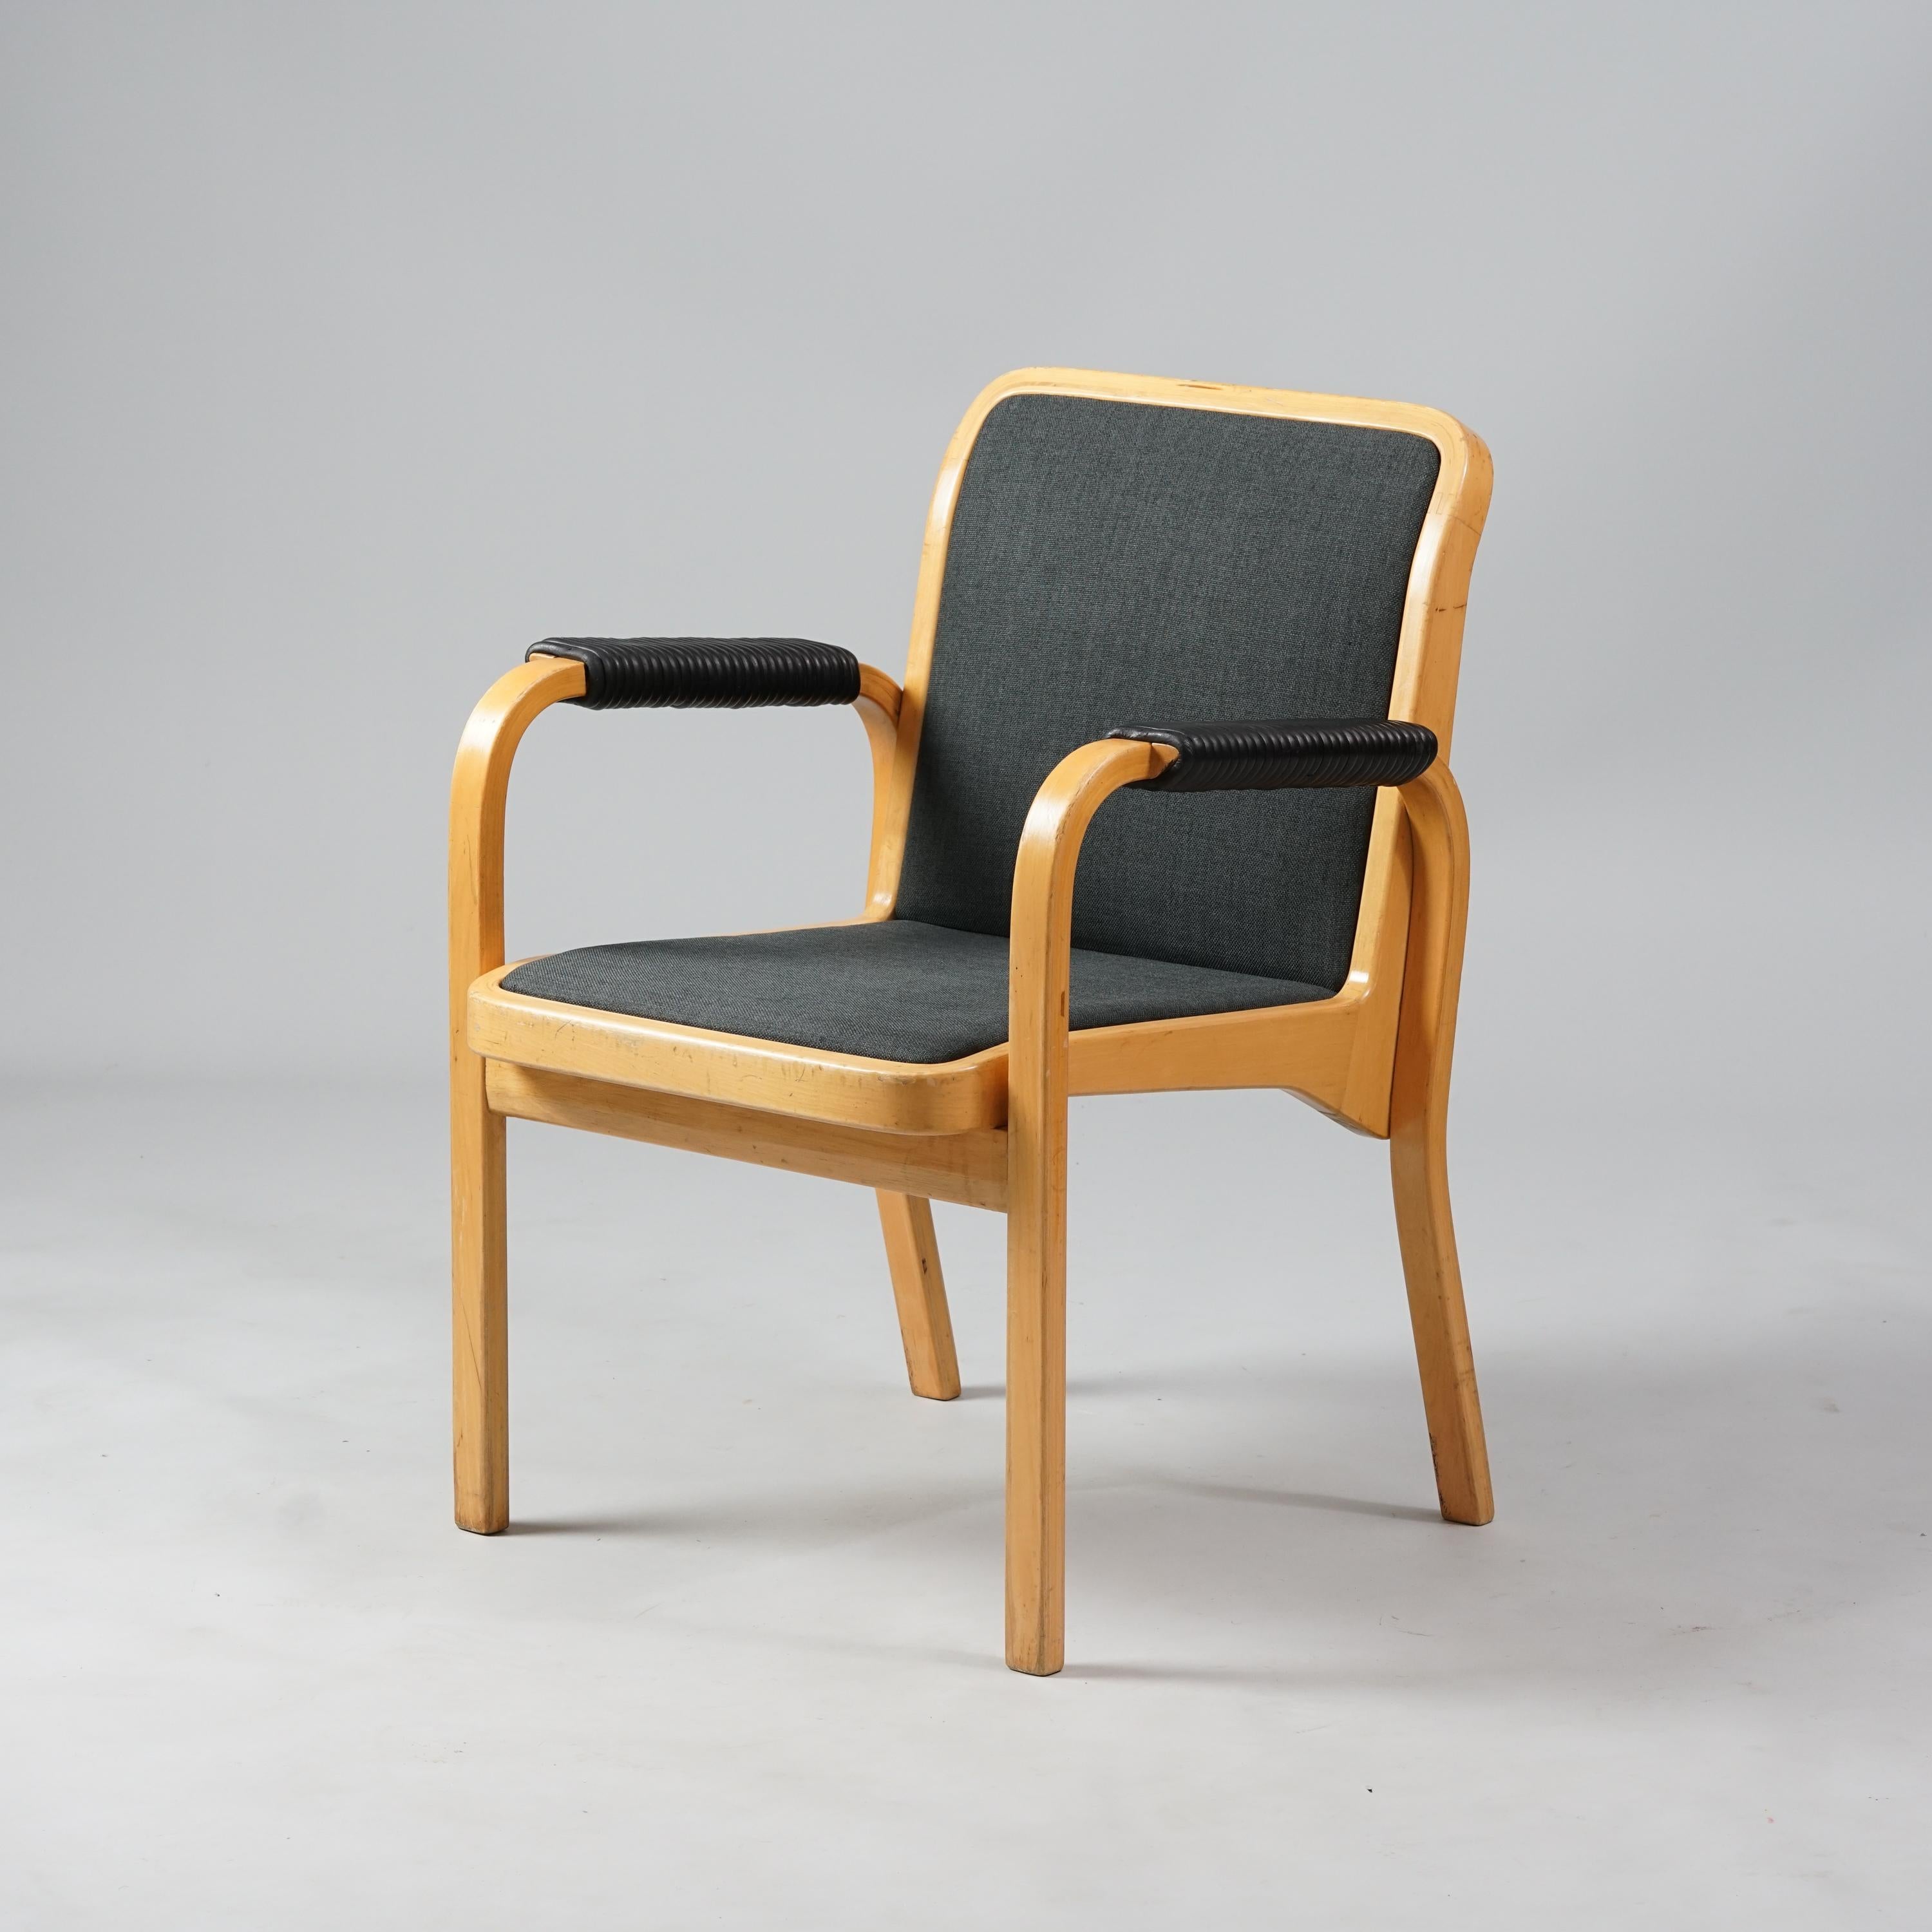 Set of two model E45 armchairs, design Alvar Aalto, manufactured by Artek, 1960/1970s, birch frame, leather details on the armrests, fabric upholstery. Good vintage condition, minor wear and patina consistent with age and use. The armchairs are